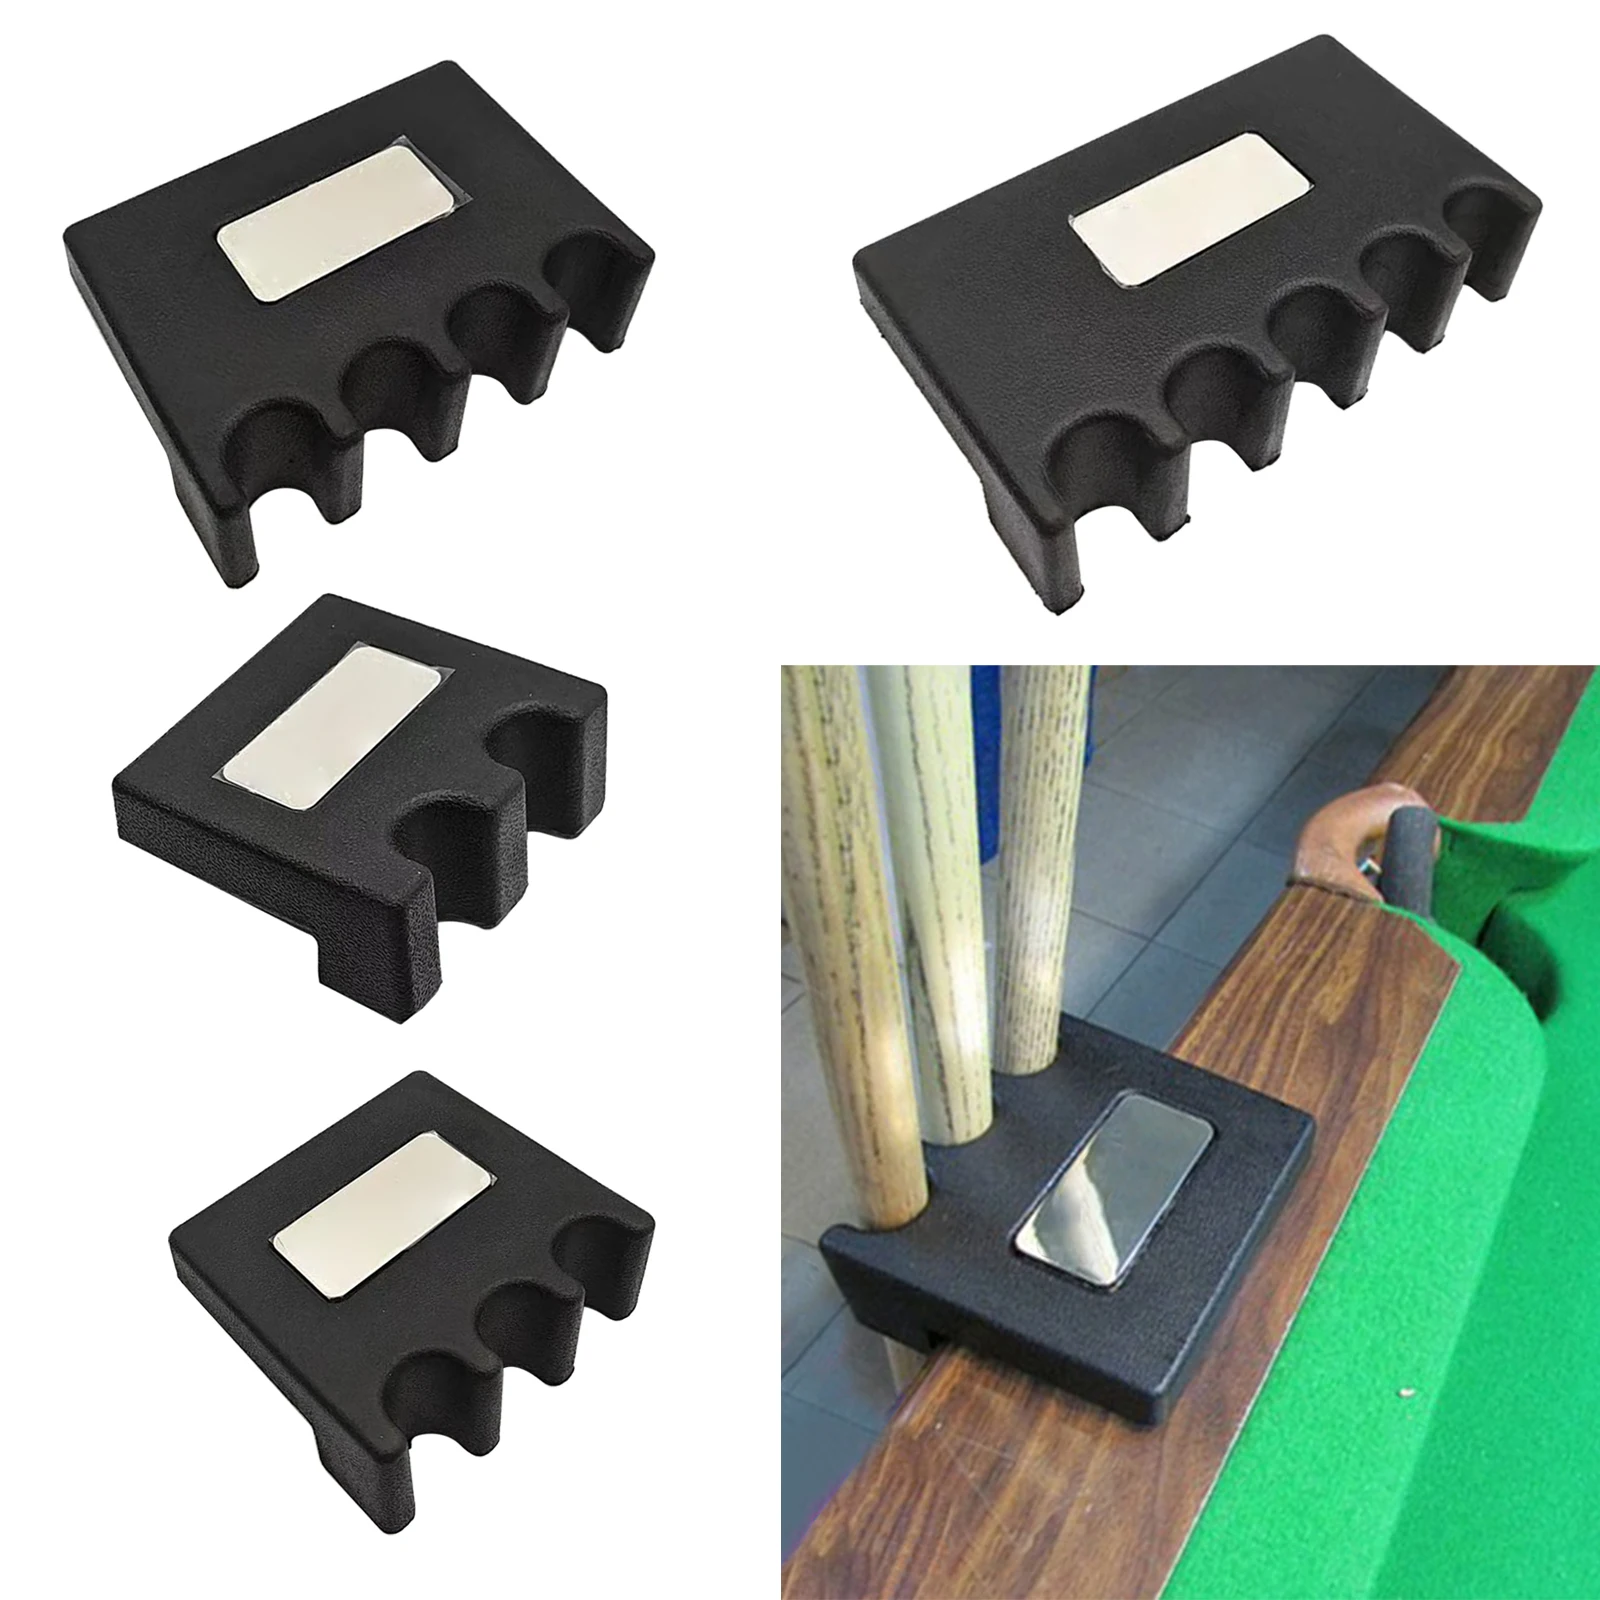 Billiard Pool Cue Stick Holder Rest Can Hold 2 to 5 Cues According to Different Sizes